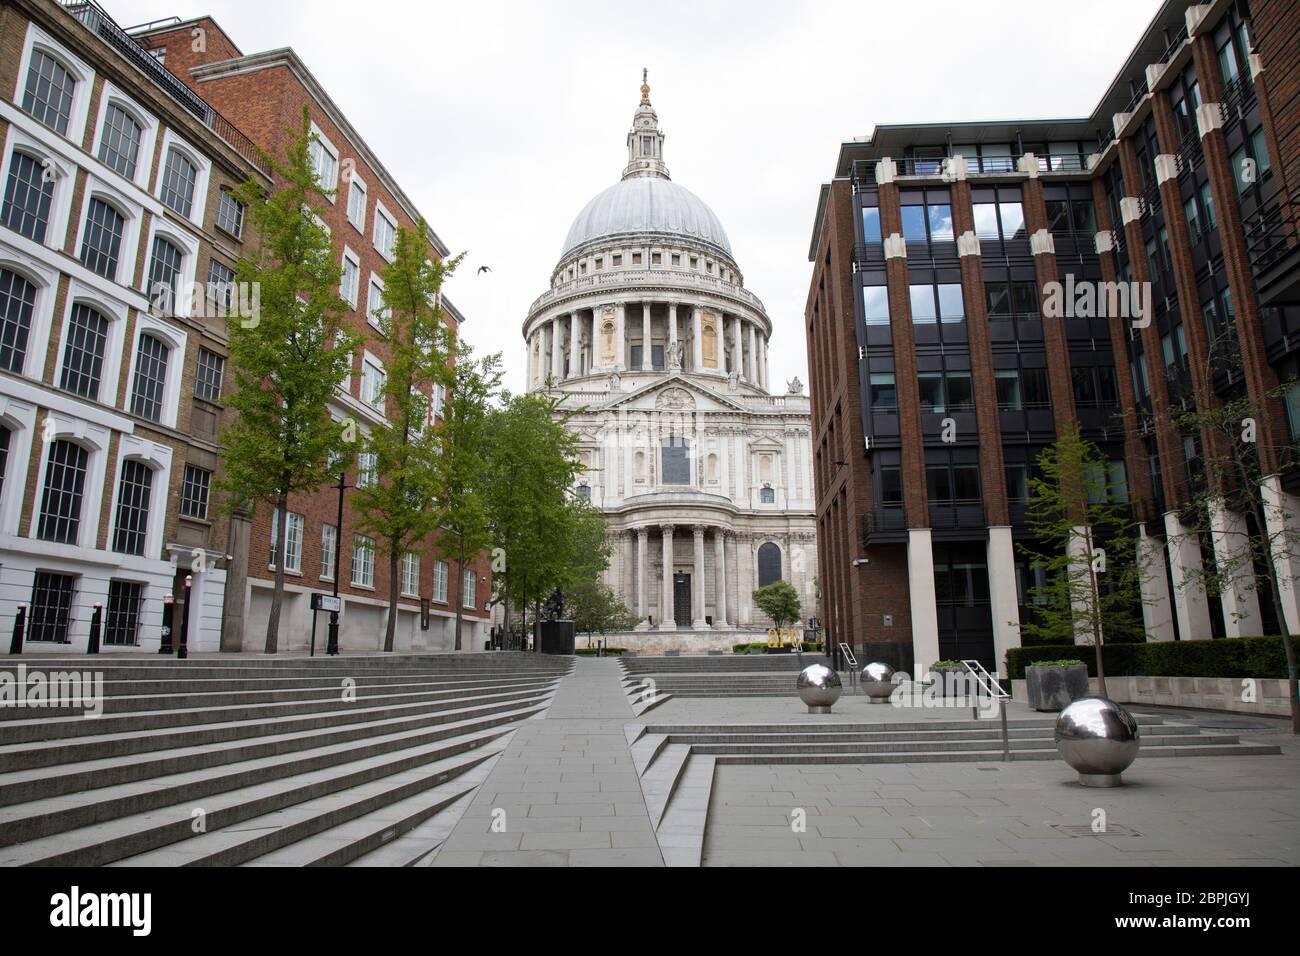 View looking towards St Pauls Cathedral is eerily quiet and silent aside from a few pedestrians on empty streets as lockdown continues and people observe the stay at home message in the capital on 11th May 2020 in London, England, United Kingdom. Coronavirus or Covid-19 is a new respiratory illness that has not previously been seen in humans. While much or Europe has been placed into lockdown, the UK government has now announced a slight relaxation of the stringent rules as part of their long term strategy, and in particular social distancing. Stock Photo